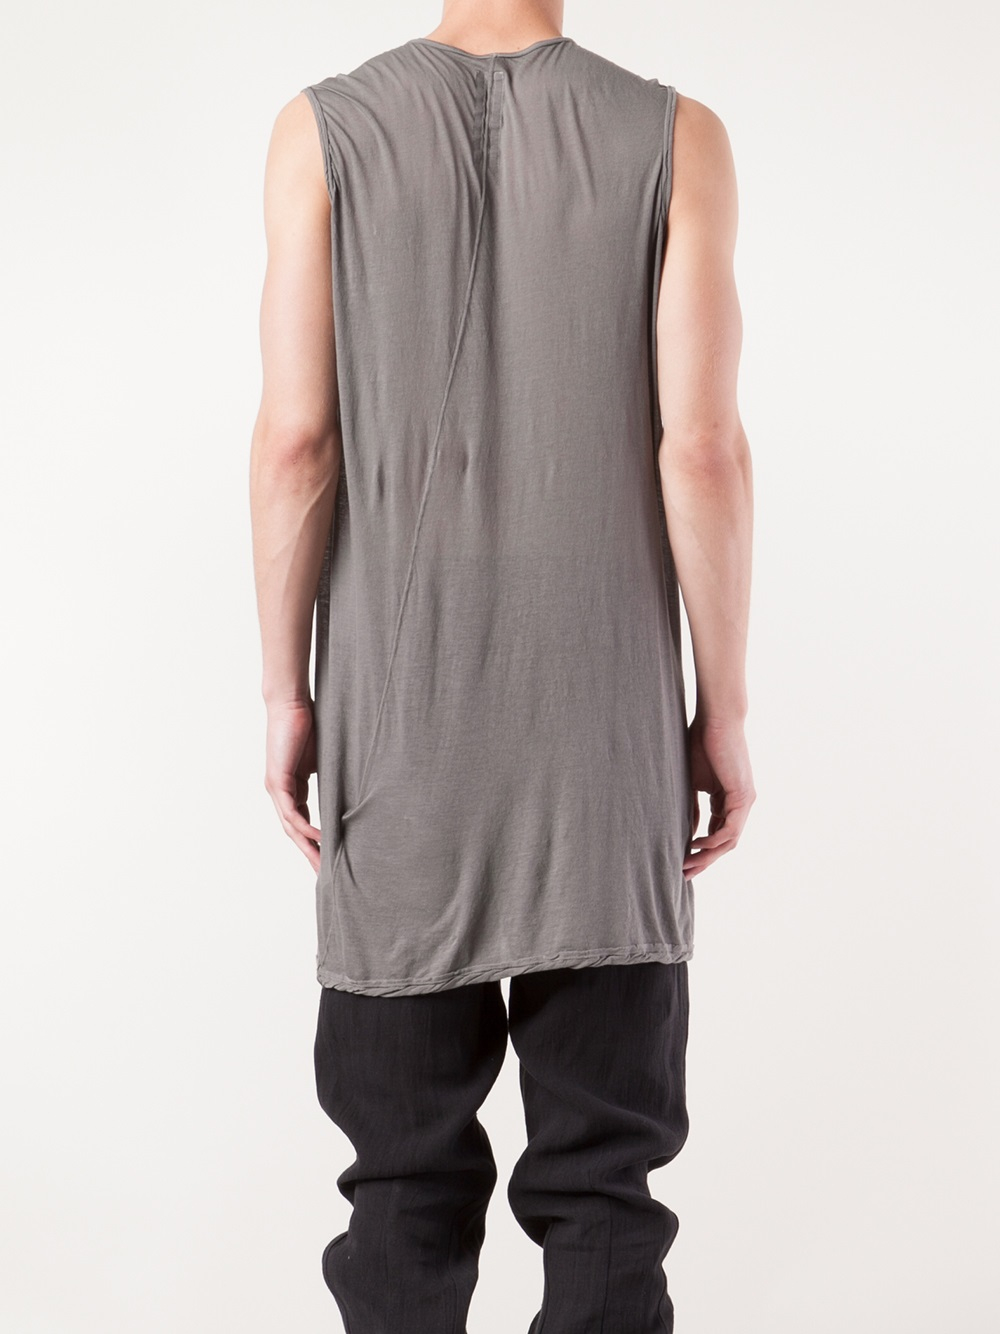 Lyst - Drkshdw By Rick Owens Sleeveless Tunic Top in Gray for Men